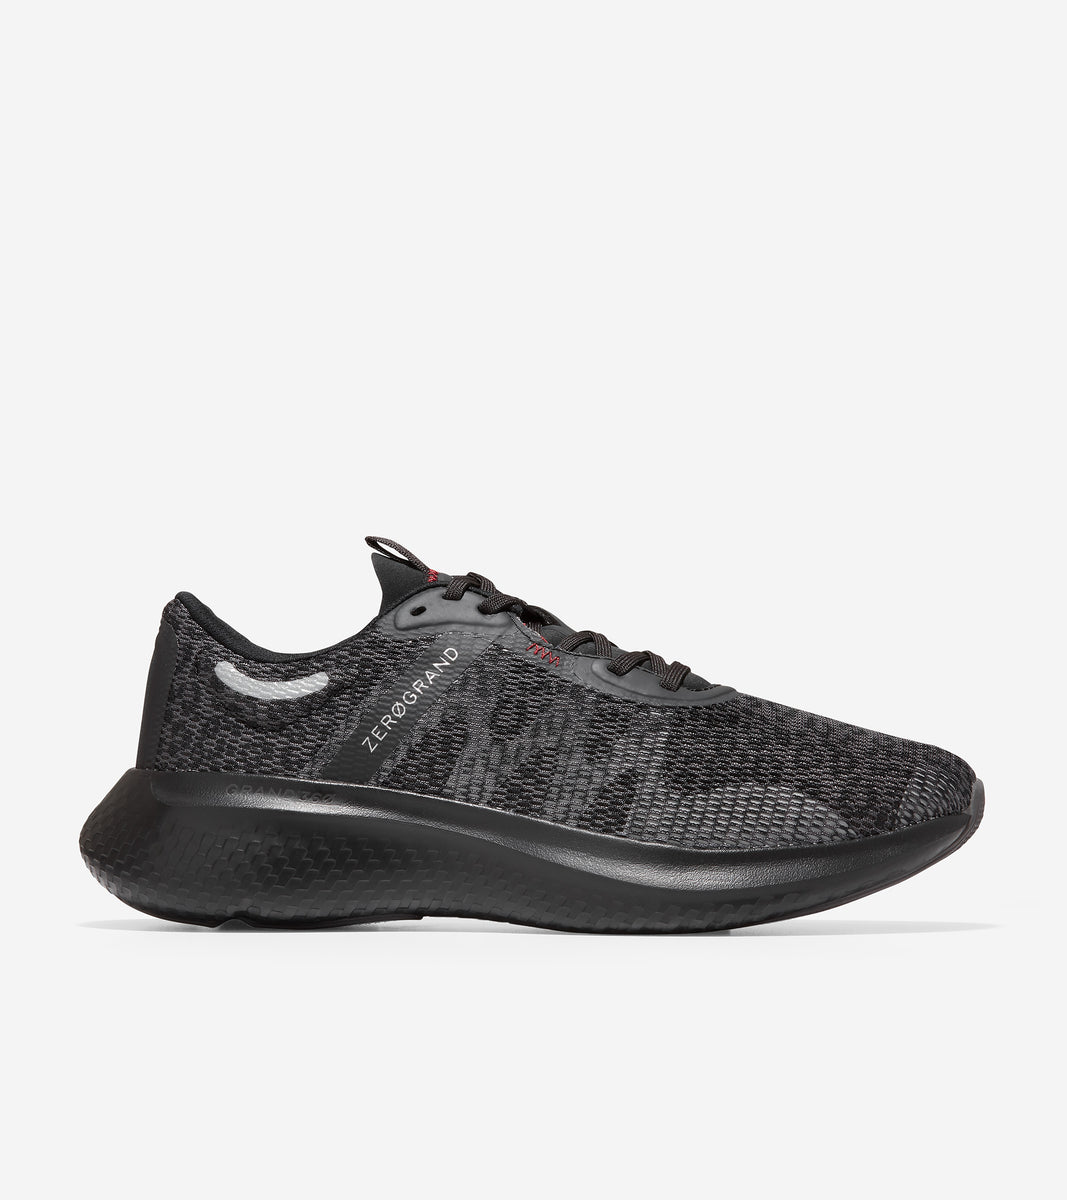 W22897-ZERØGRAND Outpace 2 Running Shoe-Black/Reflective Silver/Rio Red